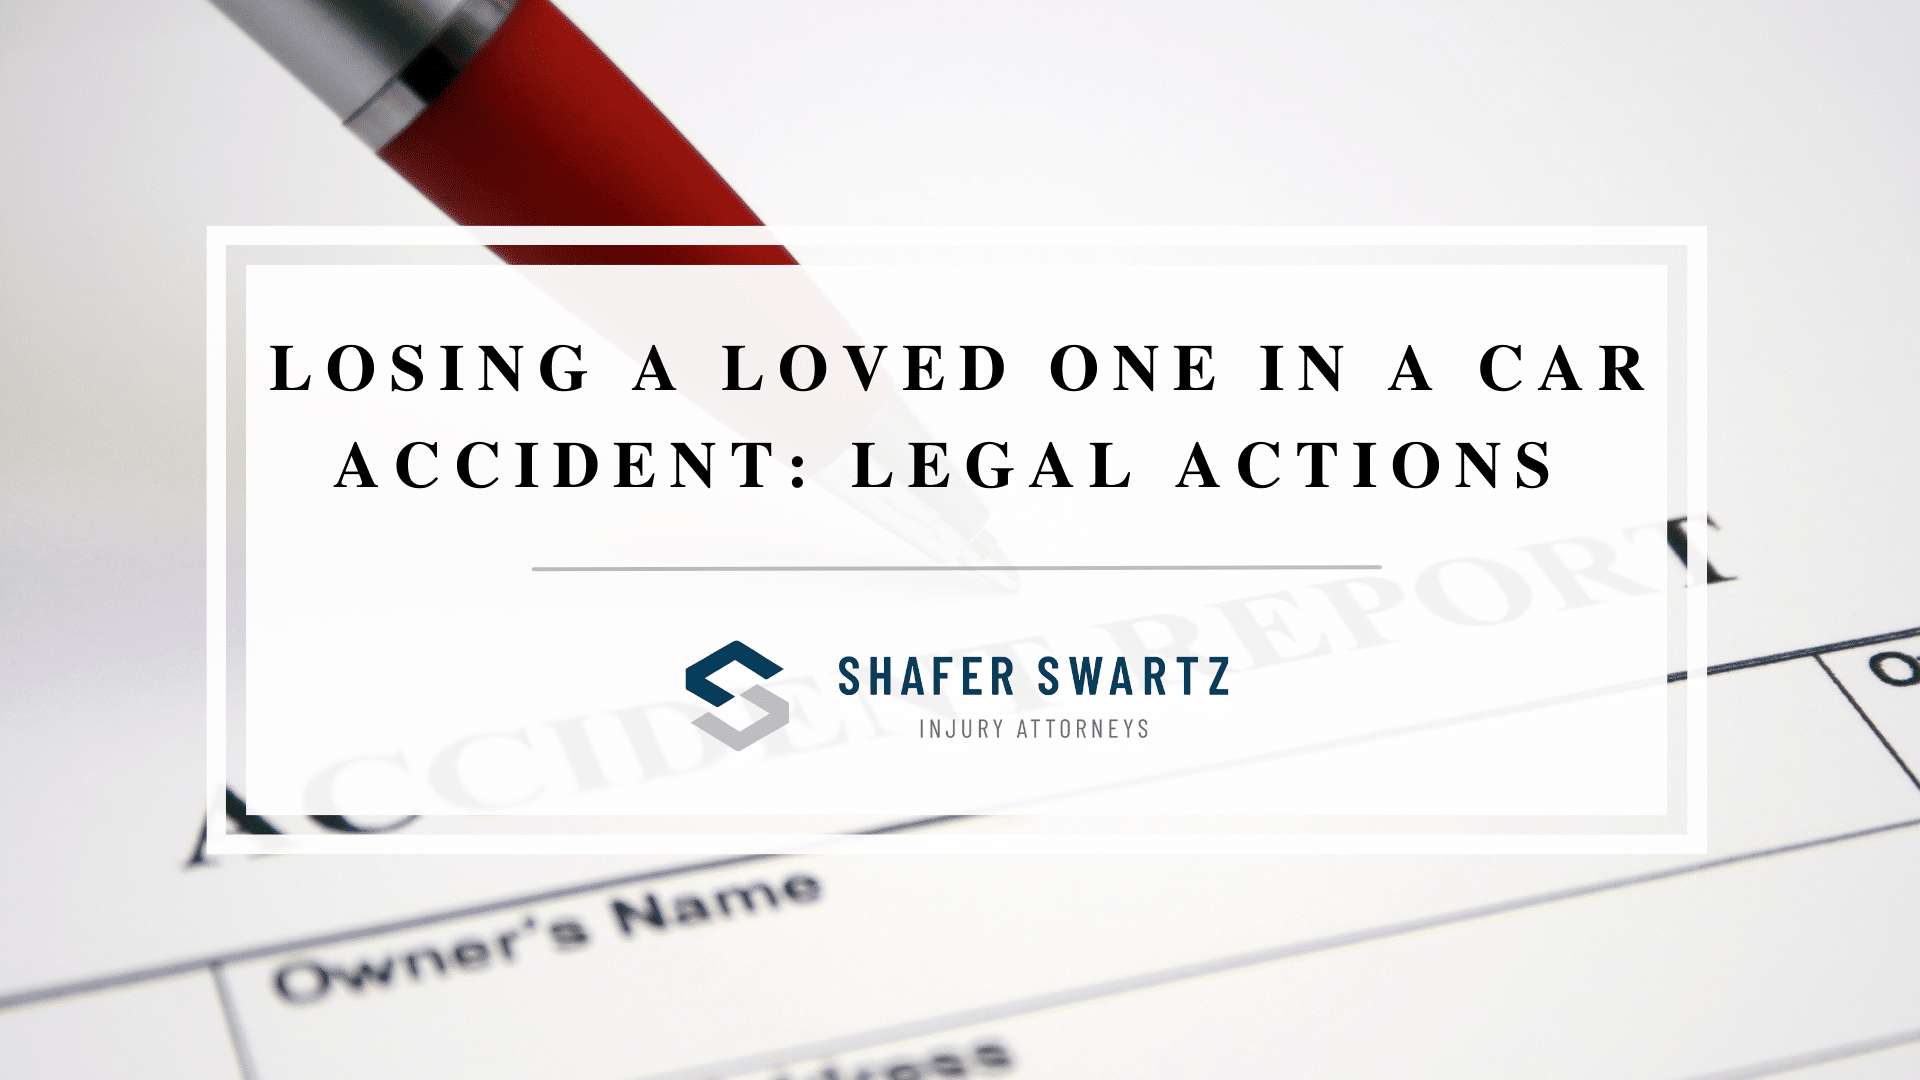 Featured image of losing a loved one in a car accident: legal actions